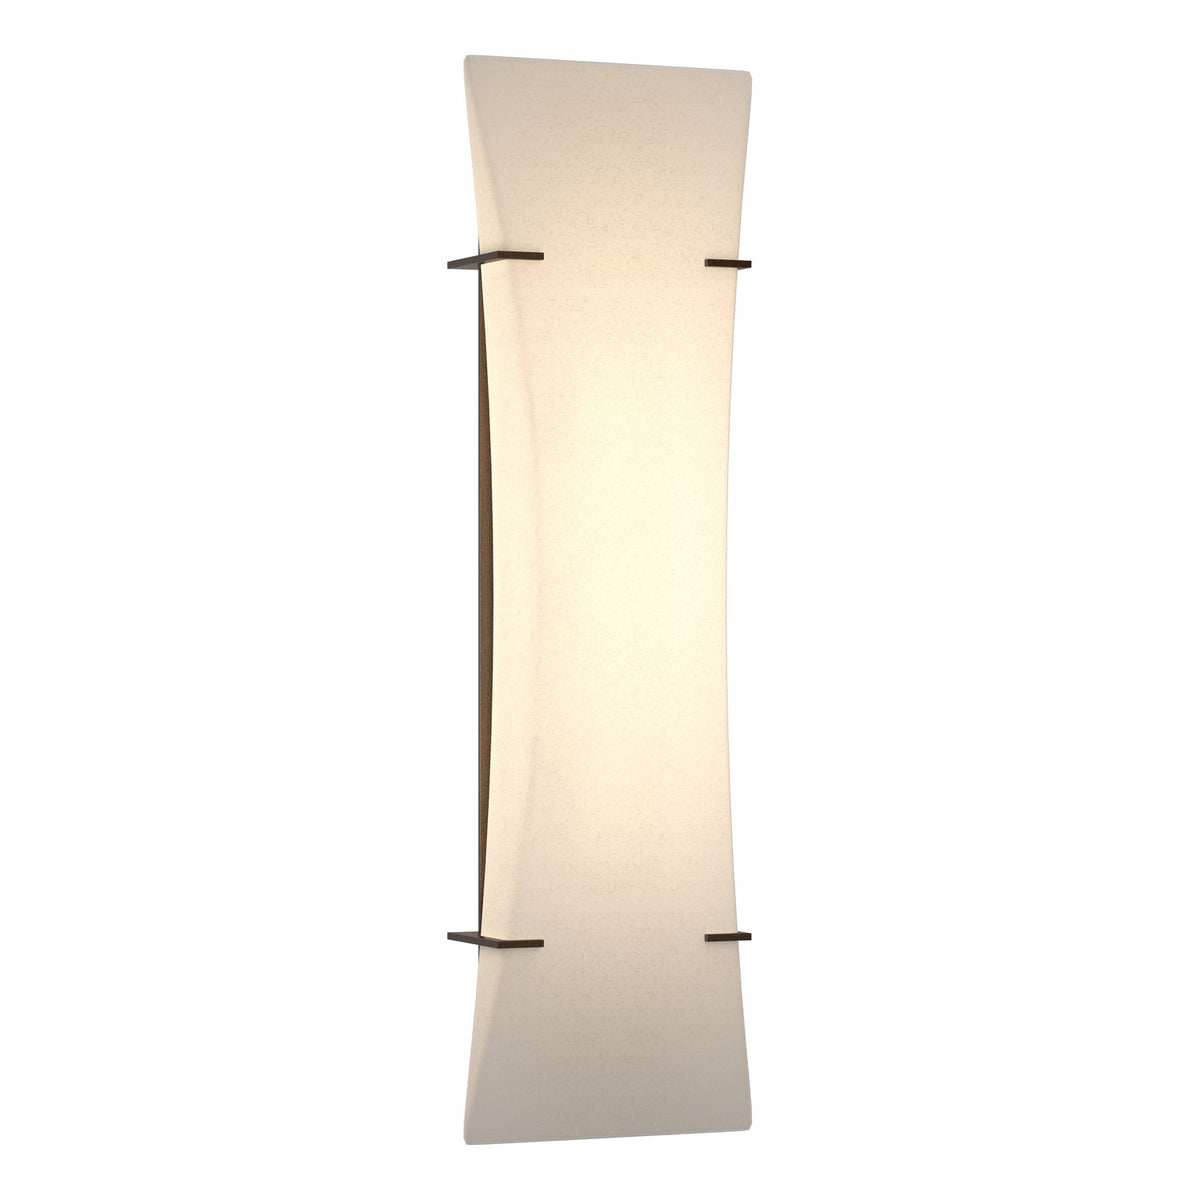 Hubbardton Forge - 205950-LED-14-SH1977 - LED Wall Sconce - Bento - Oil Rubbed Bronze